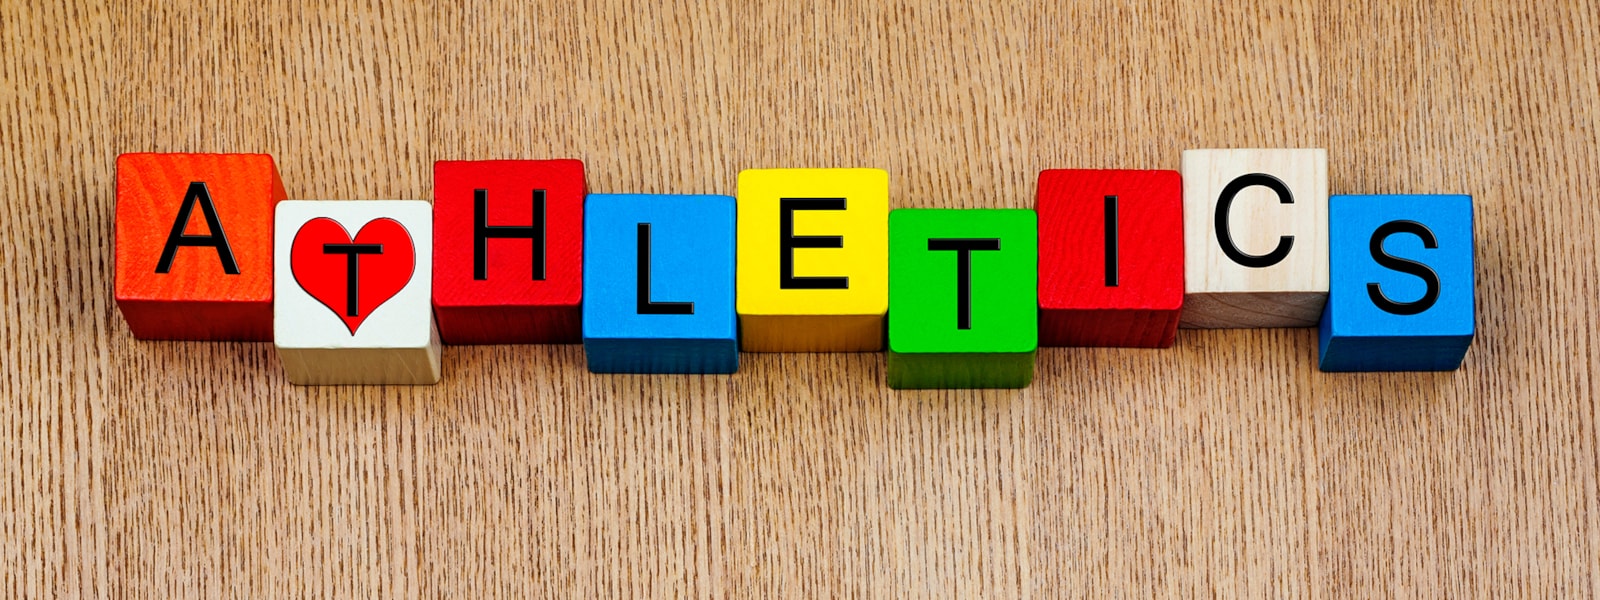 wooden blocks spelling 'athletics' on a wooden background